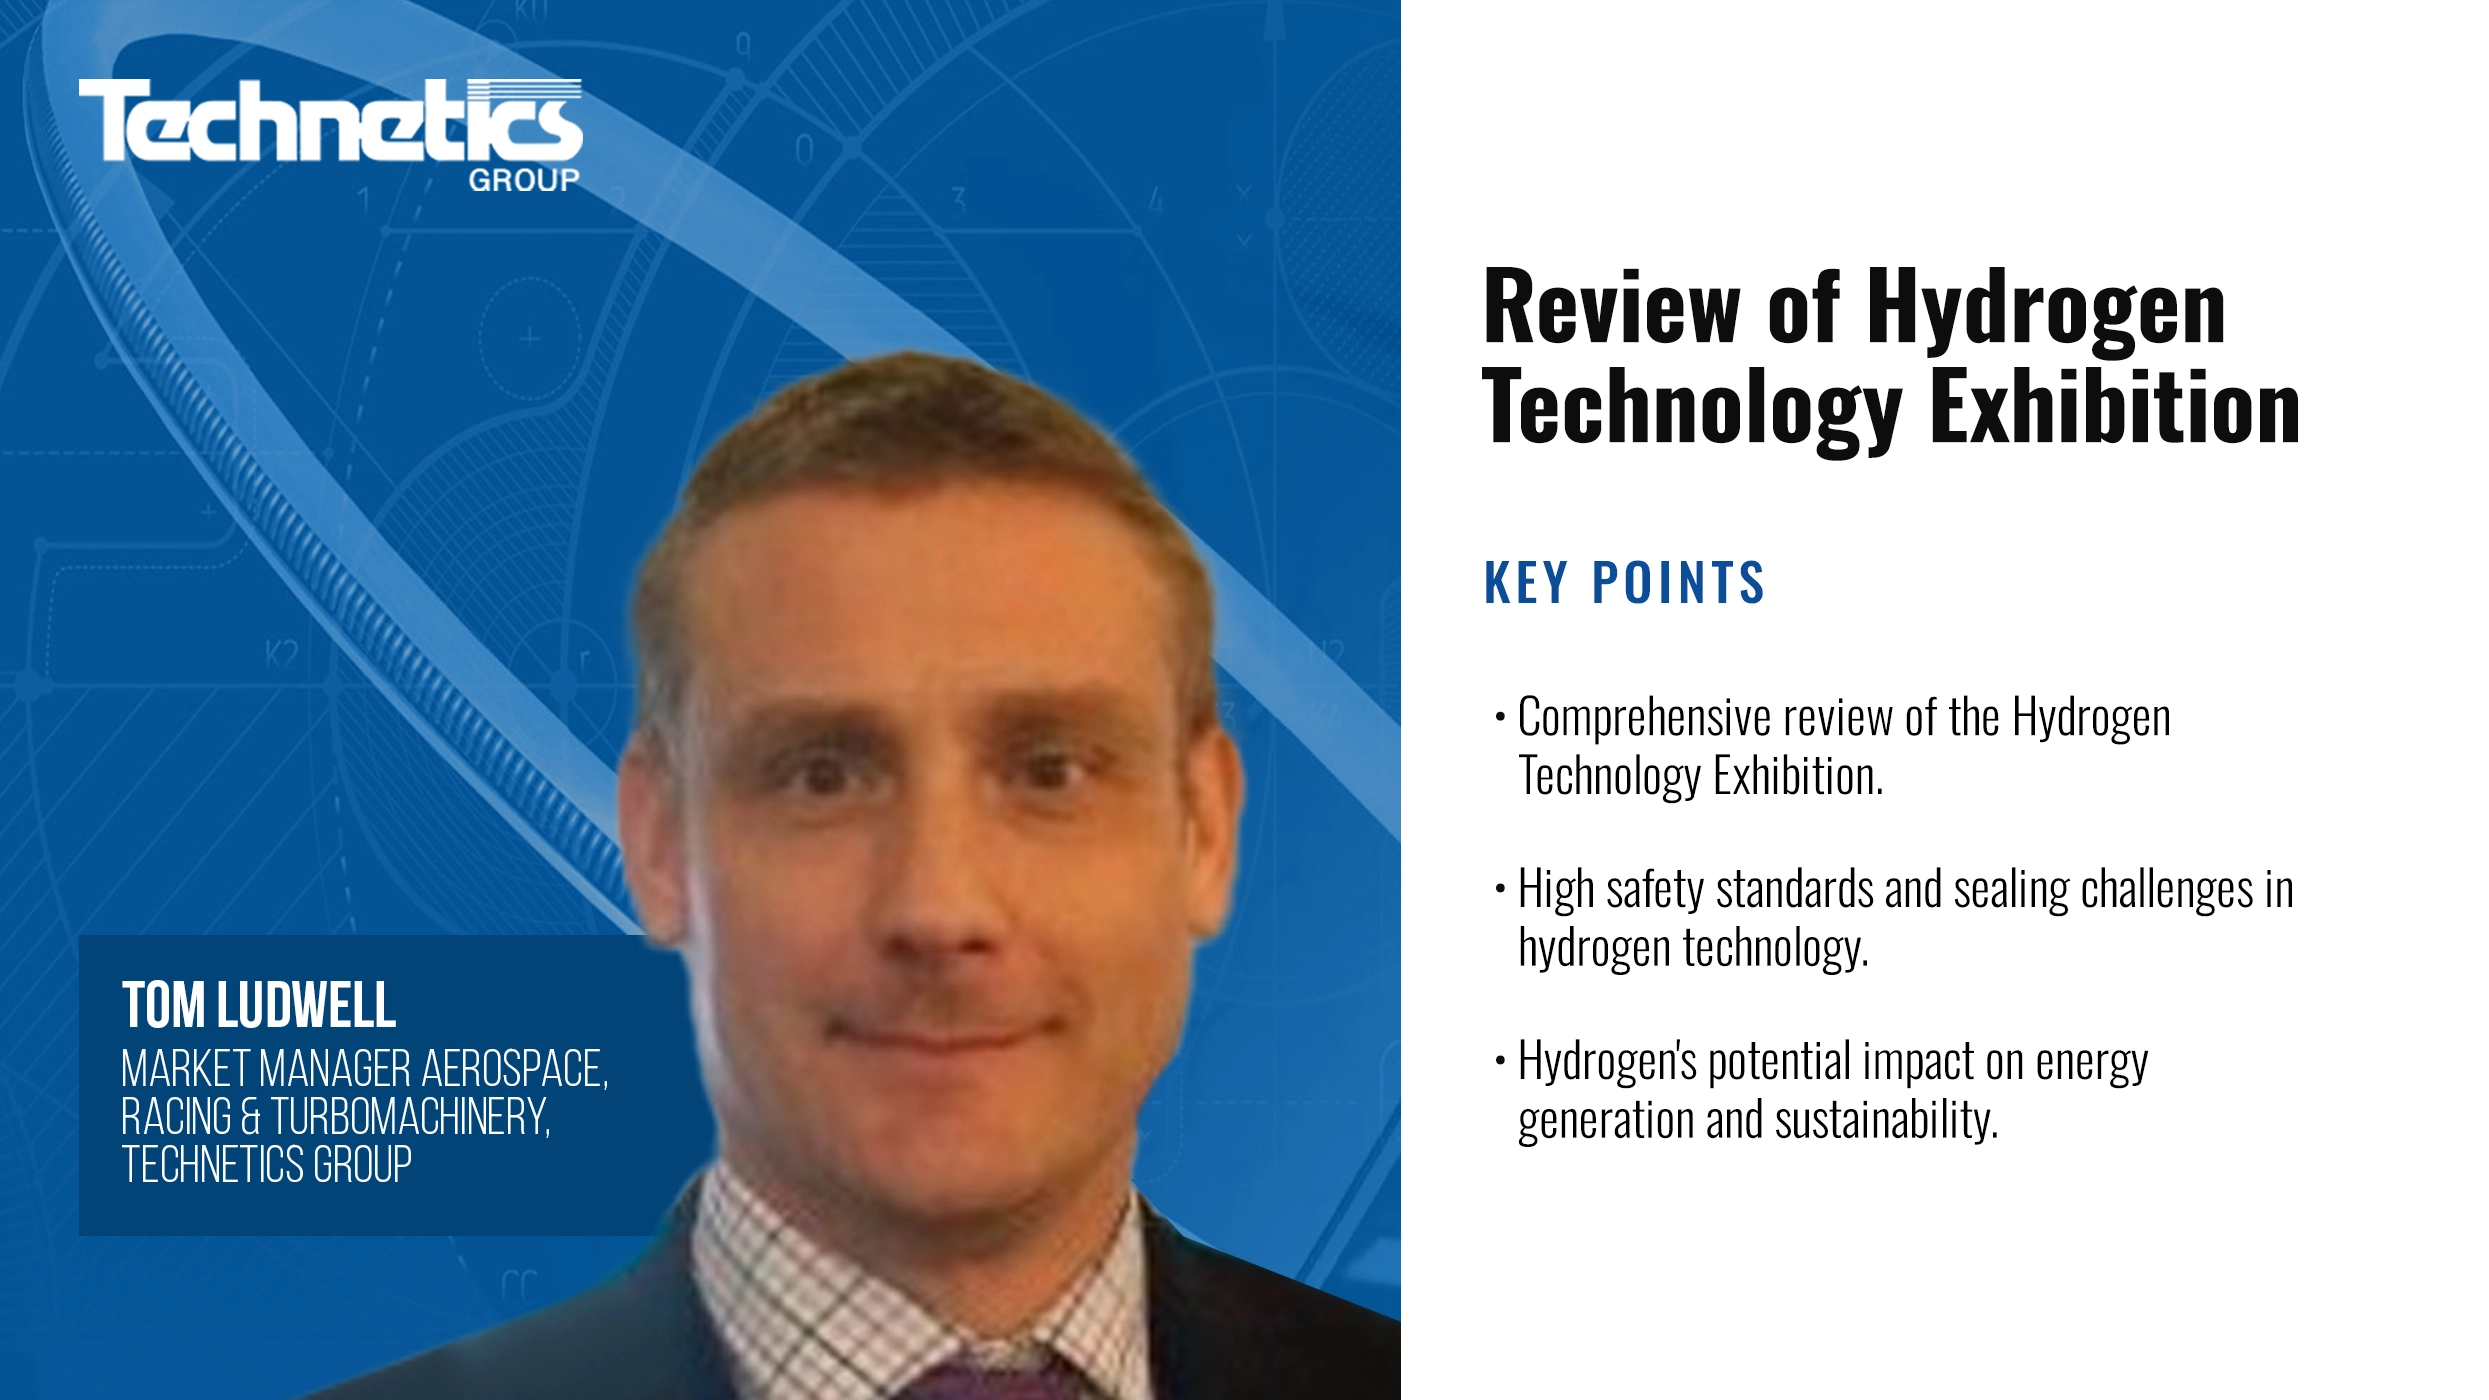 Review of Hydrogen Technology Exhibition